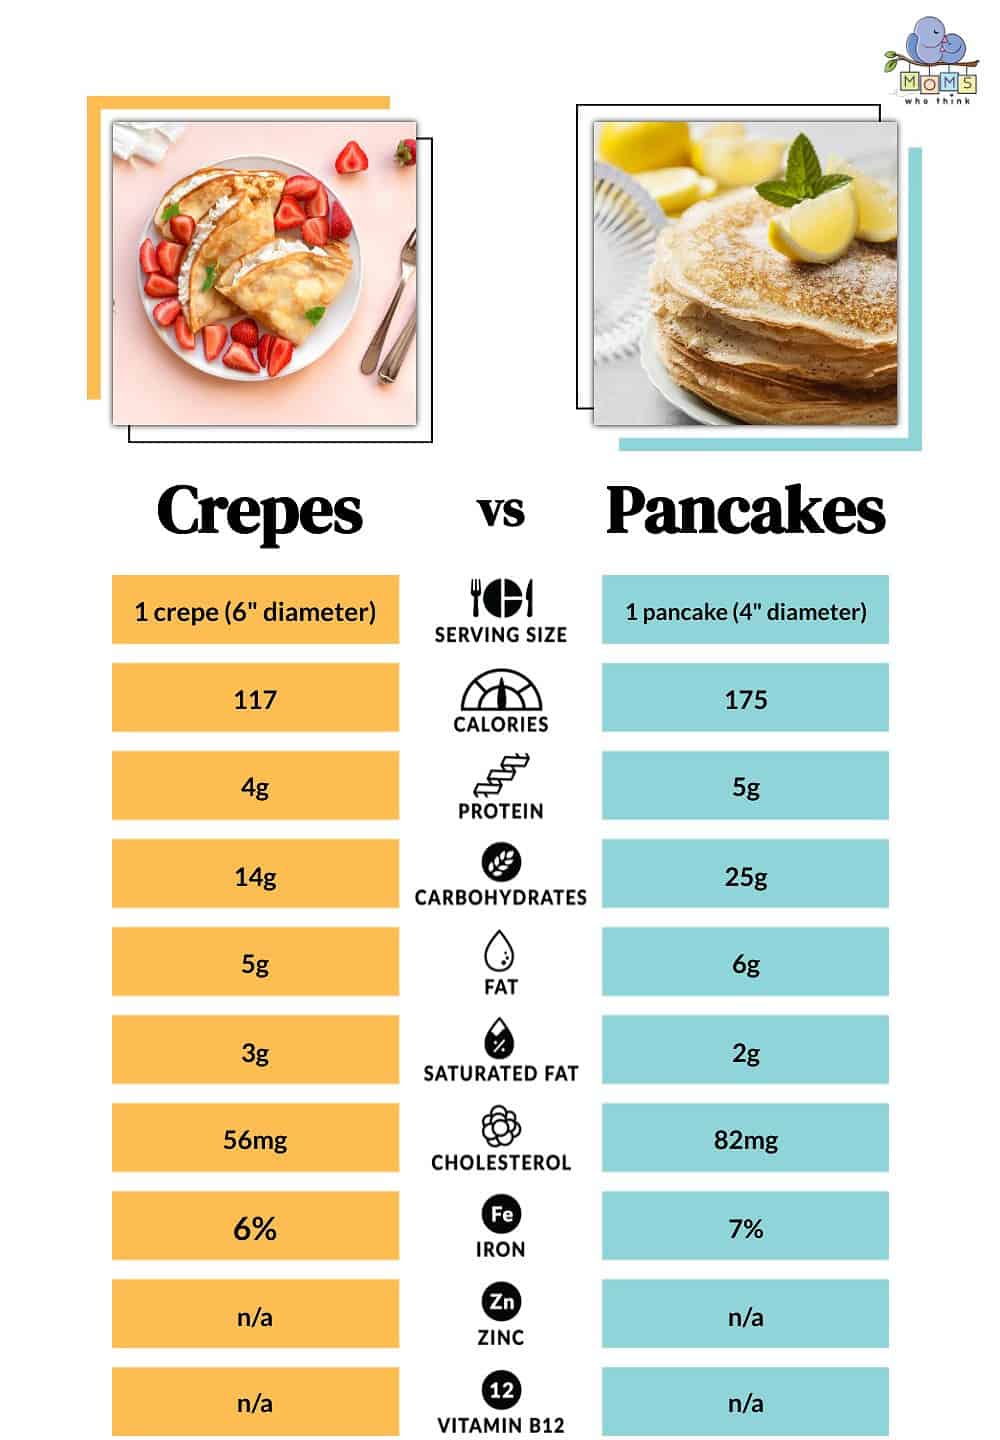 Crepes vs Pancakes Nutritional Facts